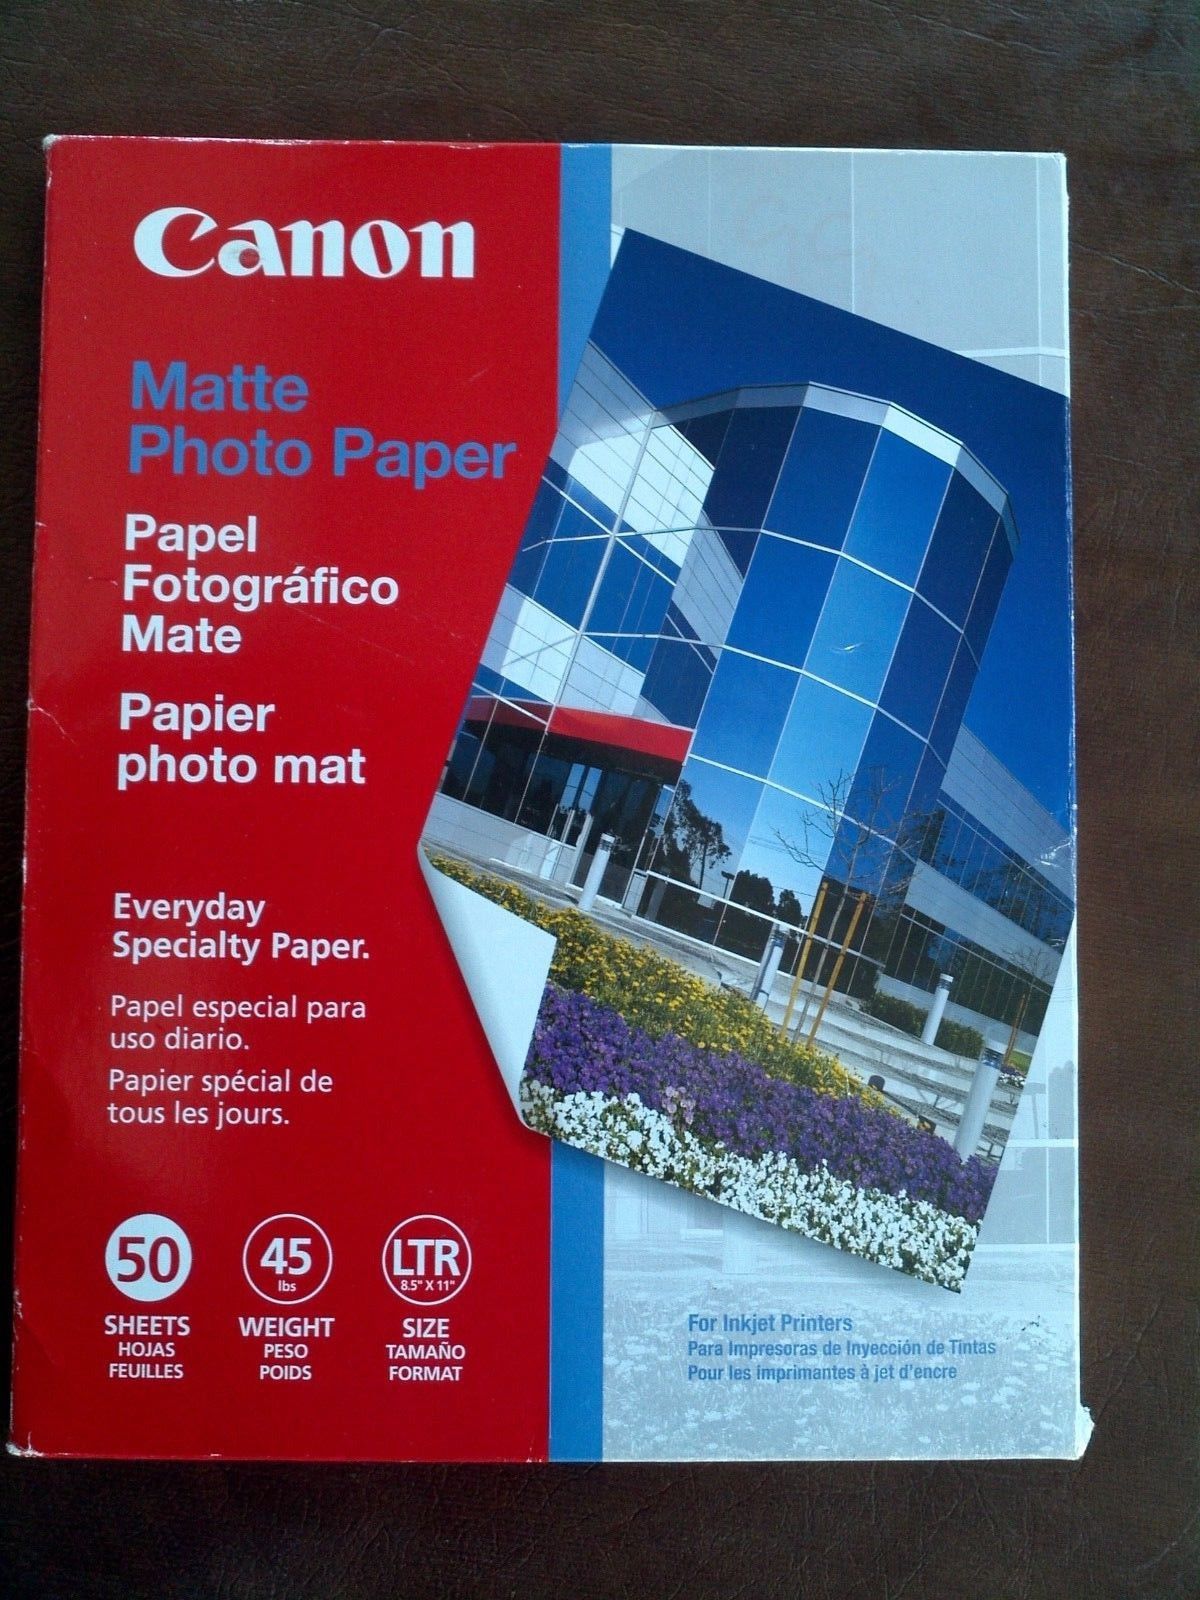 Primary image for K462S Canon Photo Paper 50 Sheets 8.5x11" Matte 8.5 Mil 45Lbs Inkjet Printers